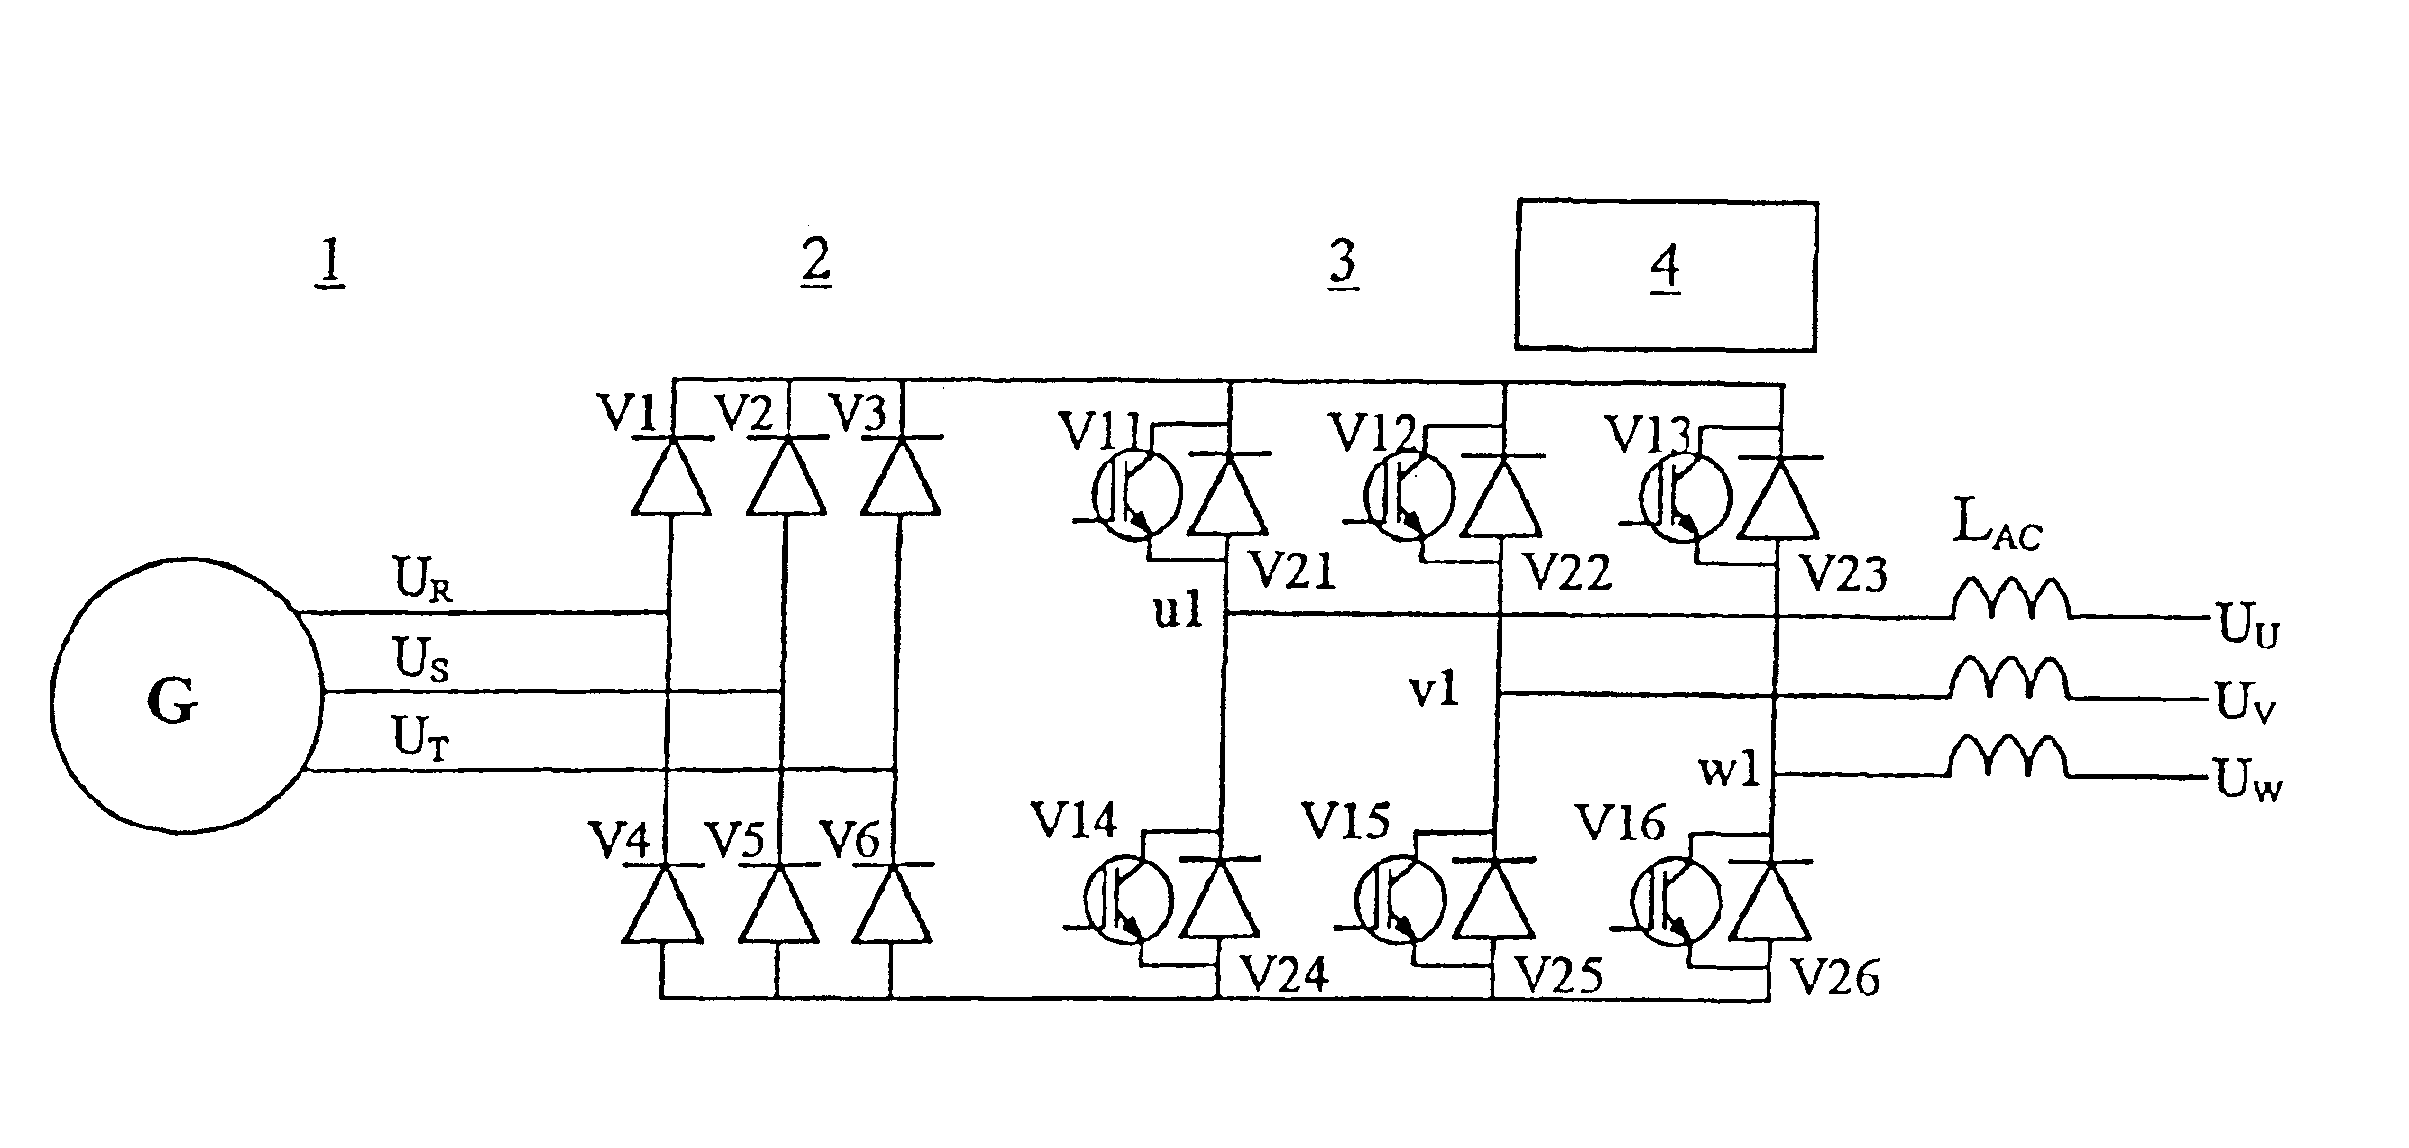 Apparatus for power transmission